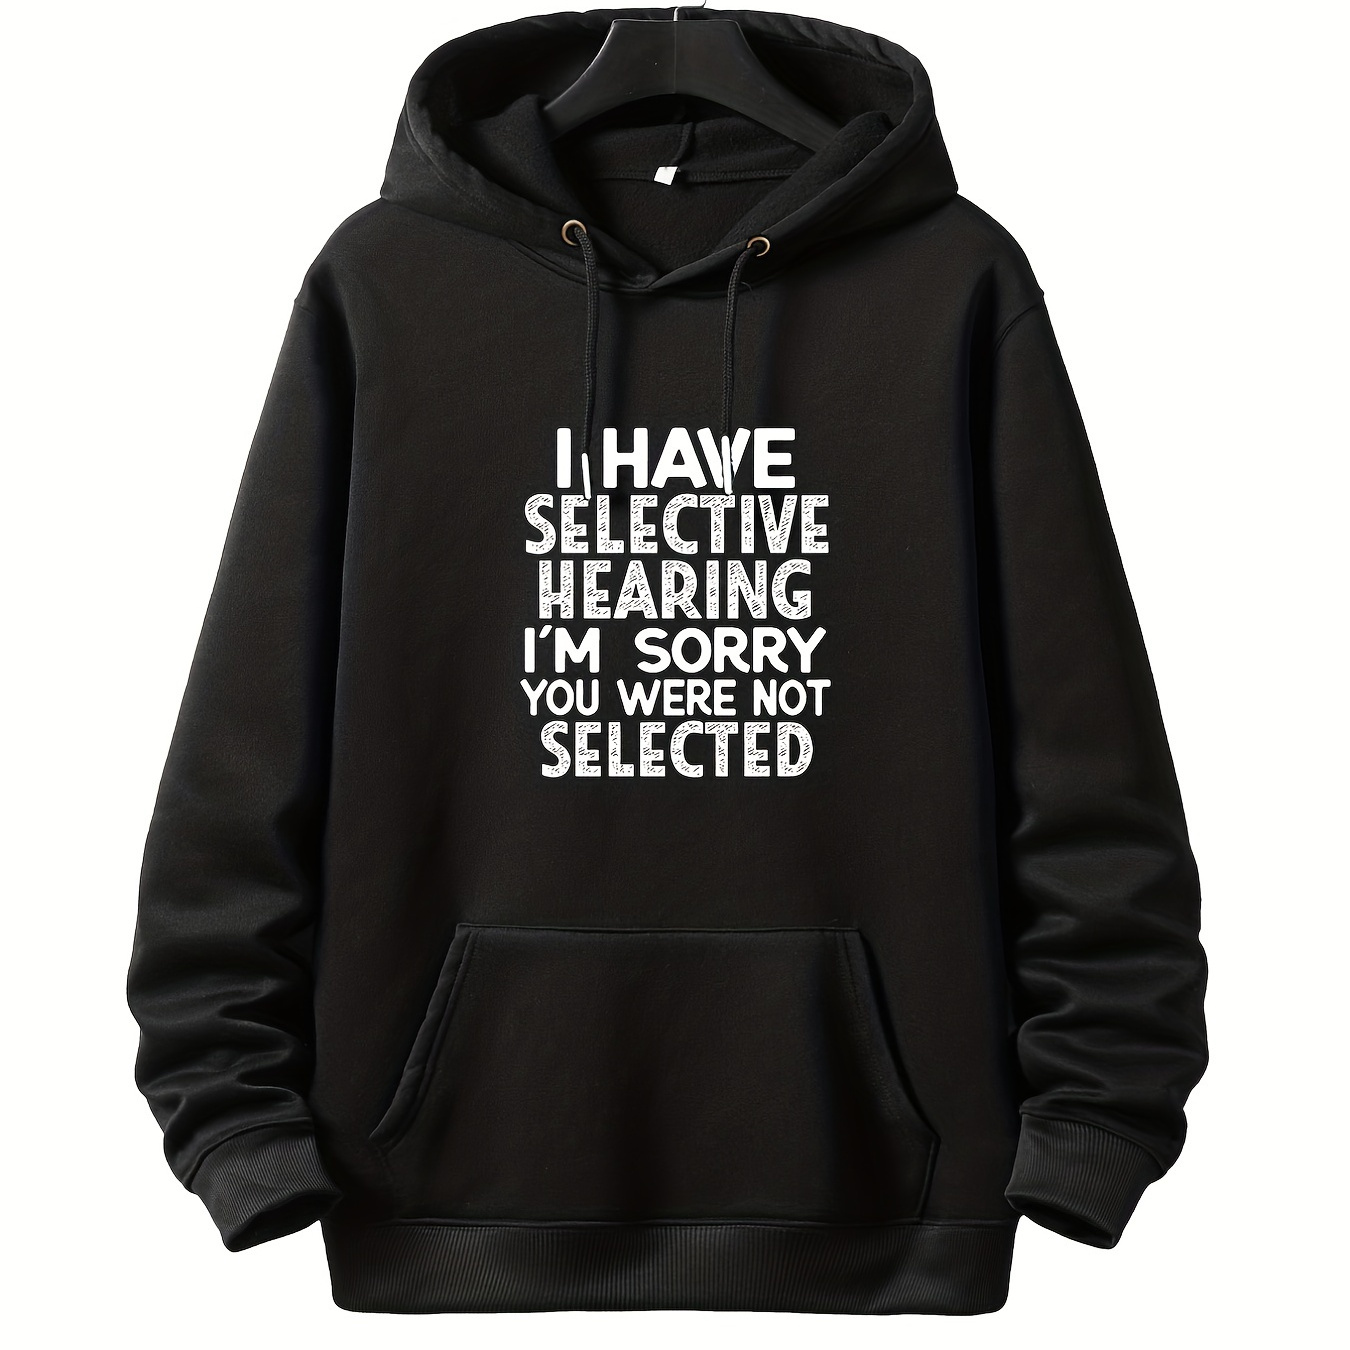 

Men's Casual Creative Letters Graphic Print Hoodies, Drawstring Comfortable Oversized Hooded Pullover Sweatshirt Plus Size Best Sellers